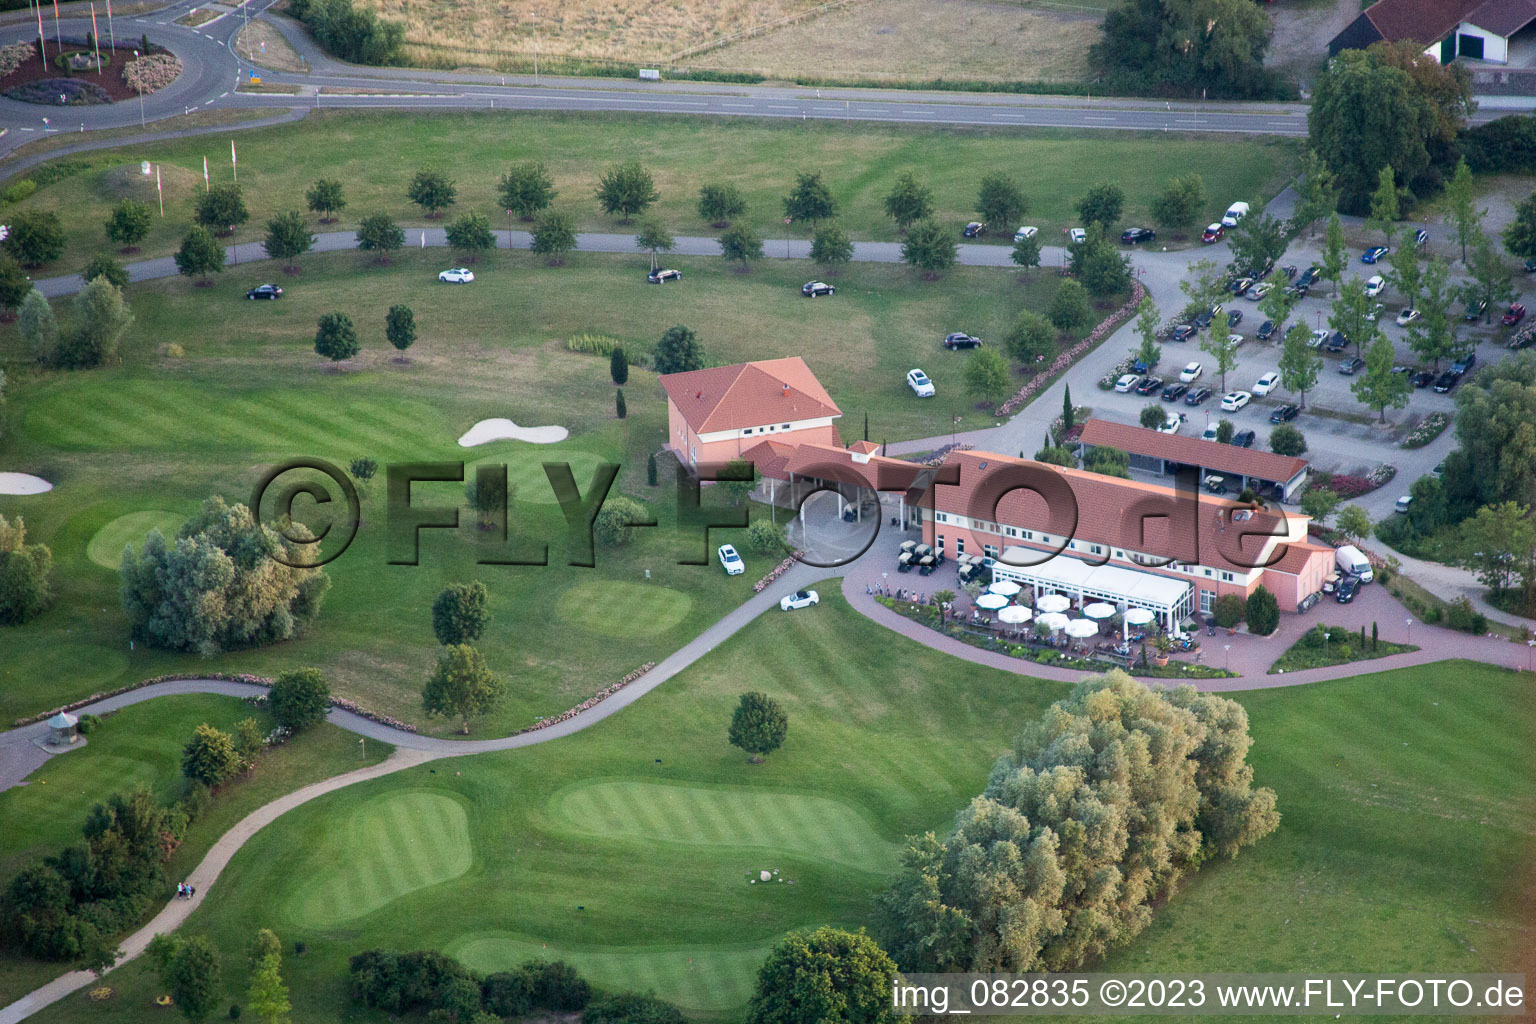 Dreihof Golf Club in Essingen in the state Rhineland-Palatinate, Germany seen from above